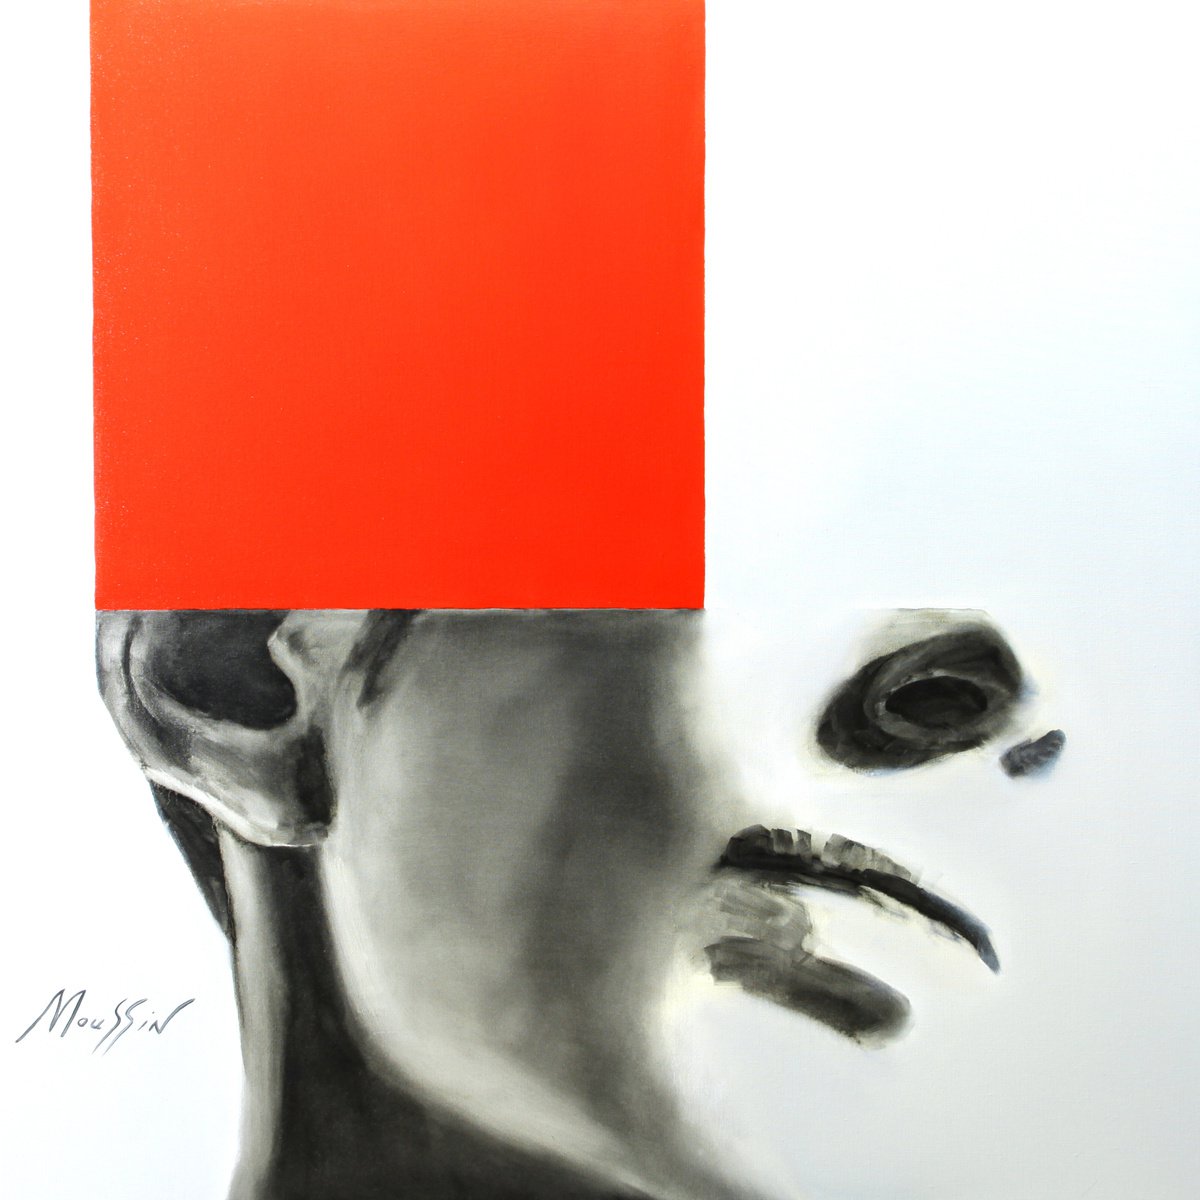 Imagination with red 120 x 120 cm. by MOUSSIN IRJAN